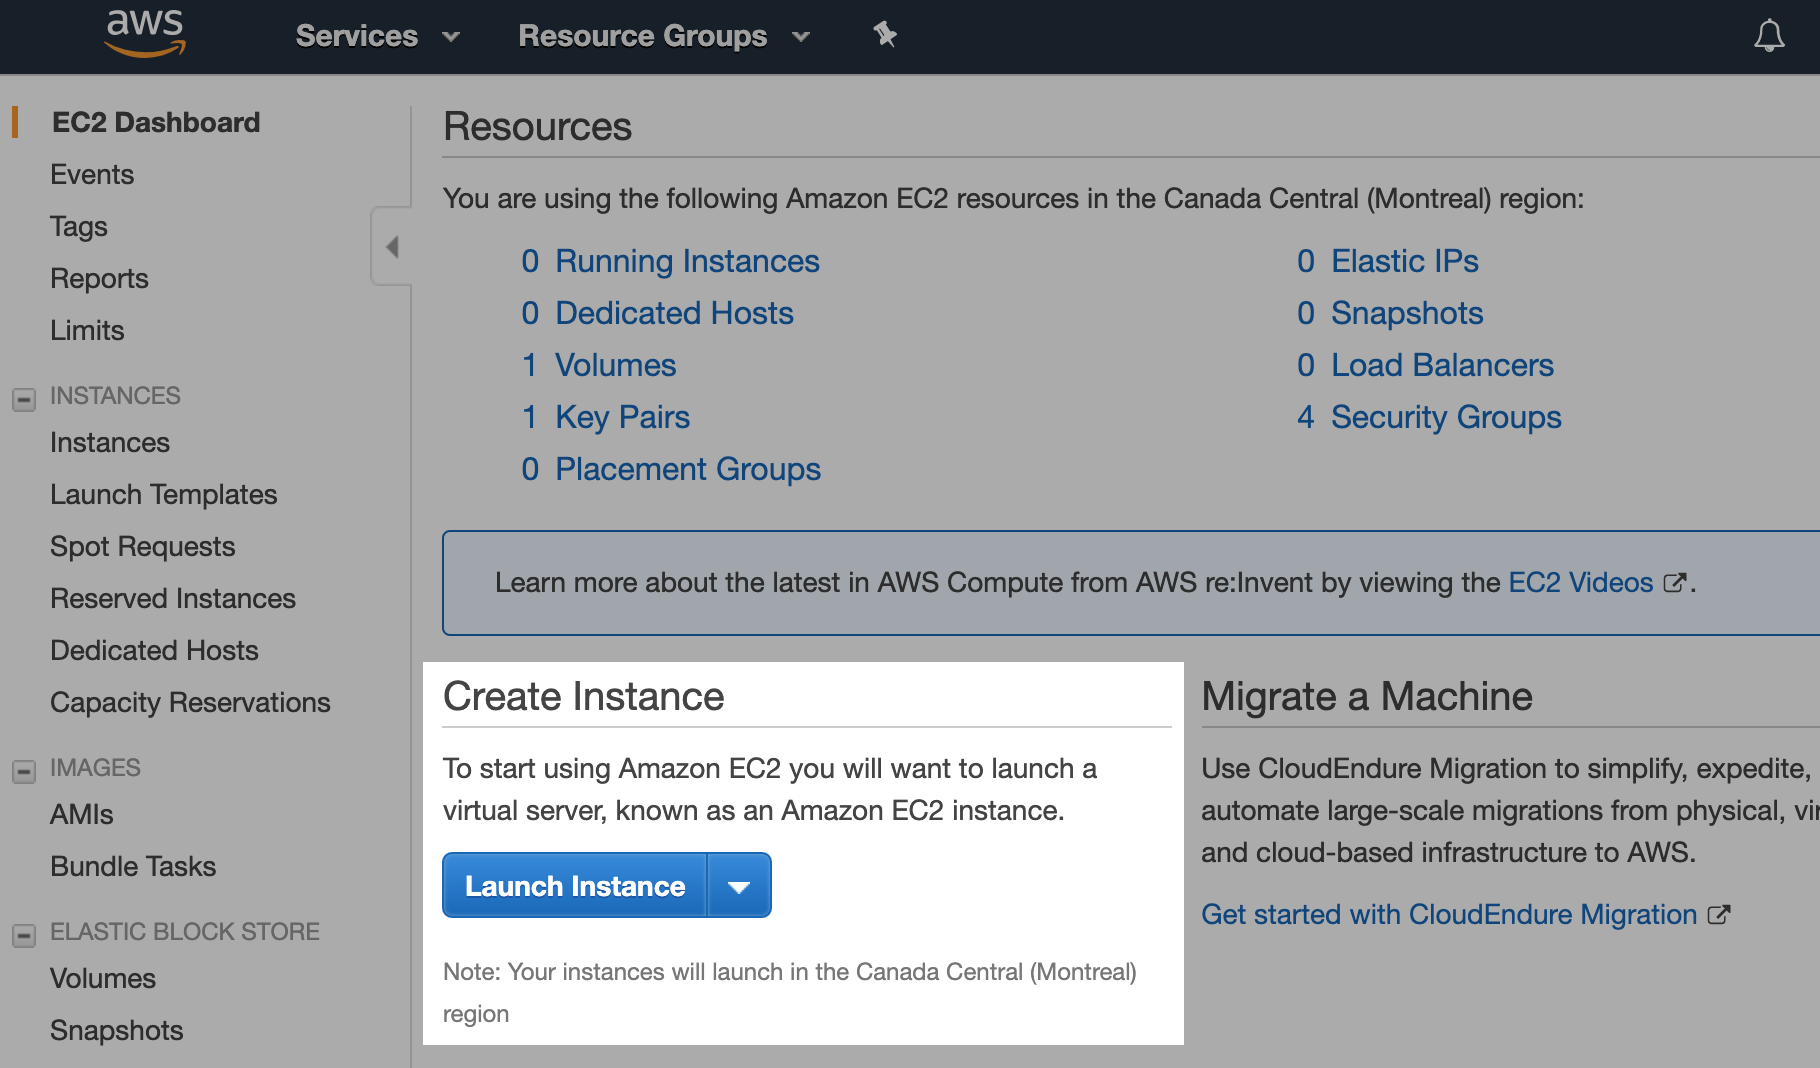 Launching a new EC2 instance.